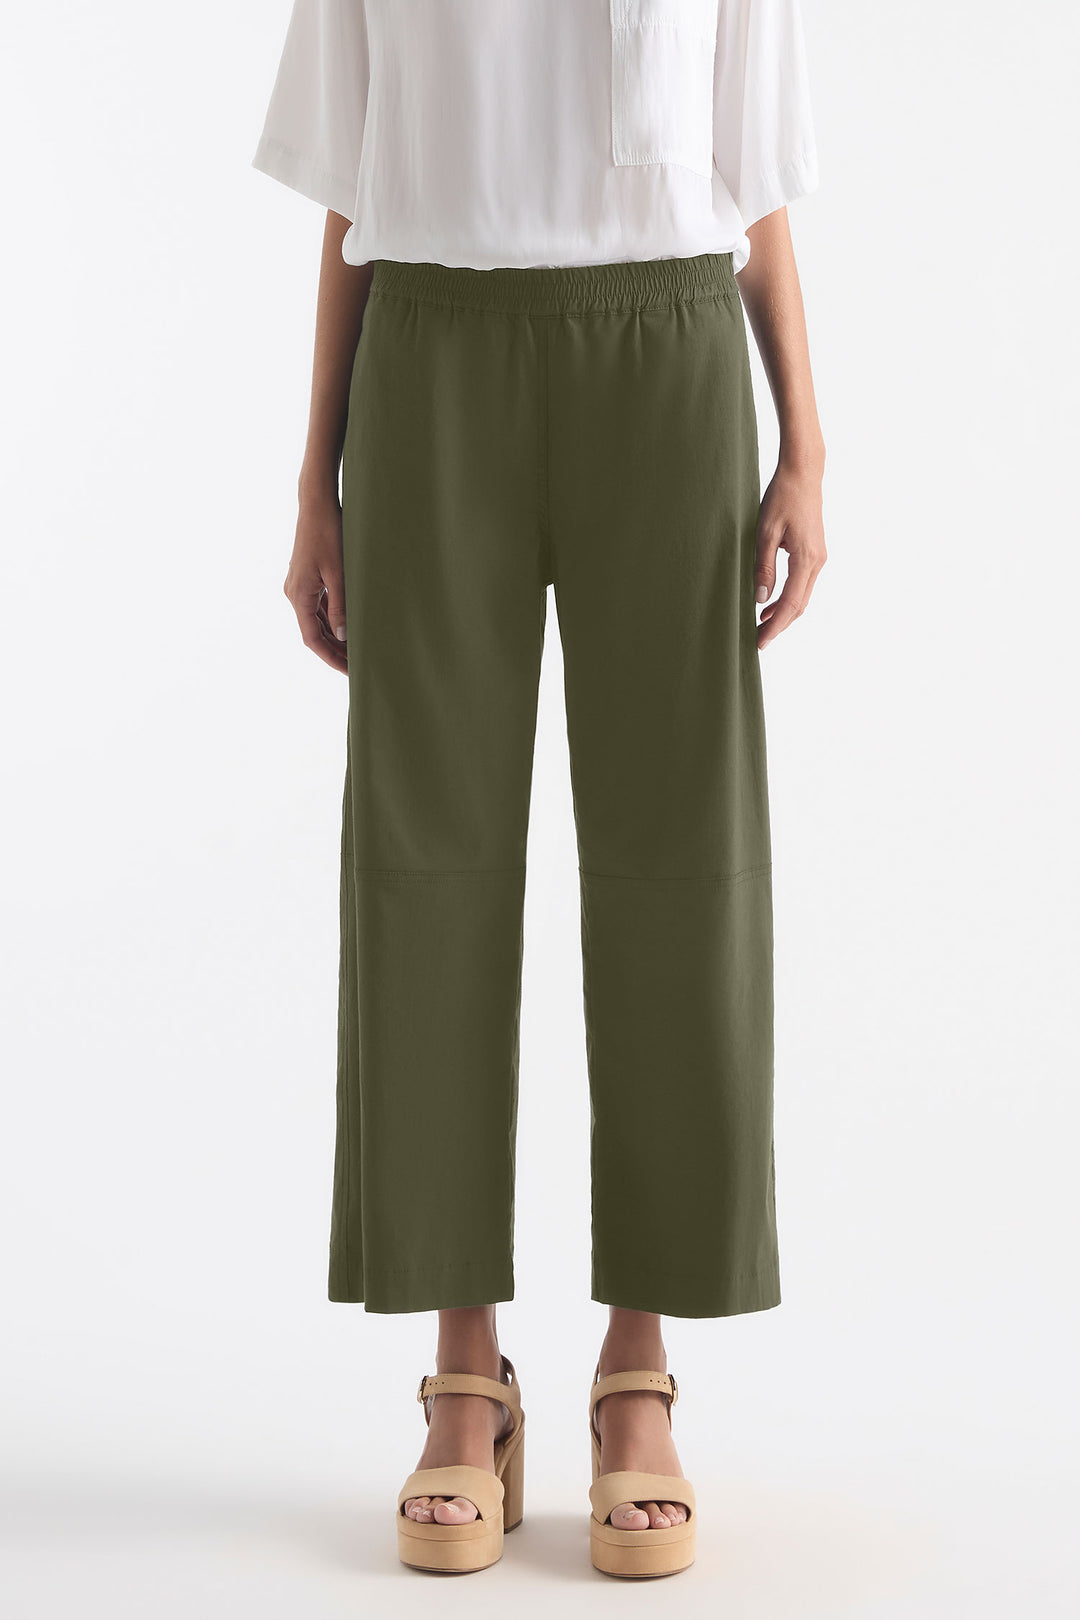 Slice Pace Pant in Otter